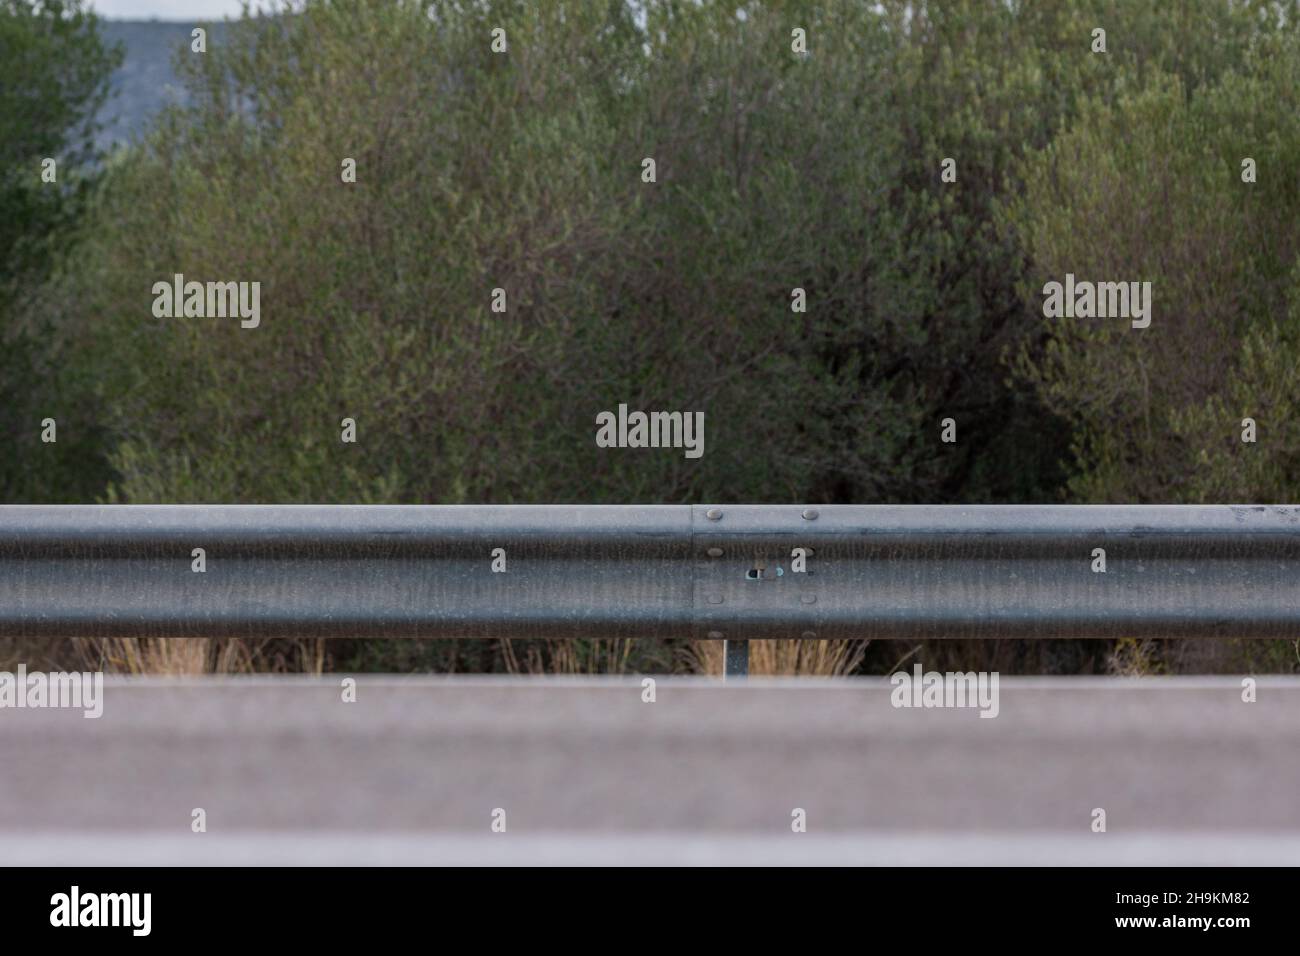 Guard rails on a motorway Stock Photo